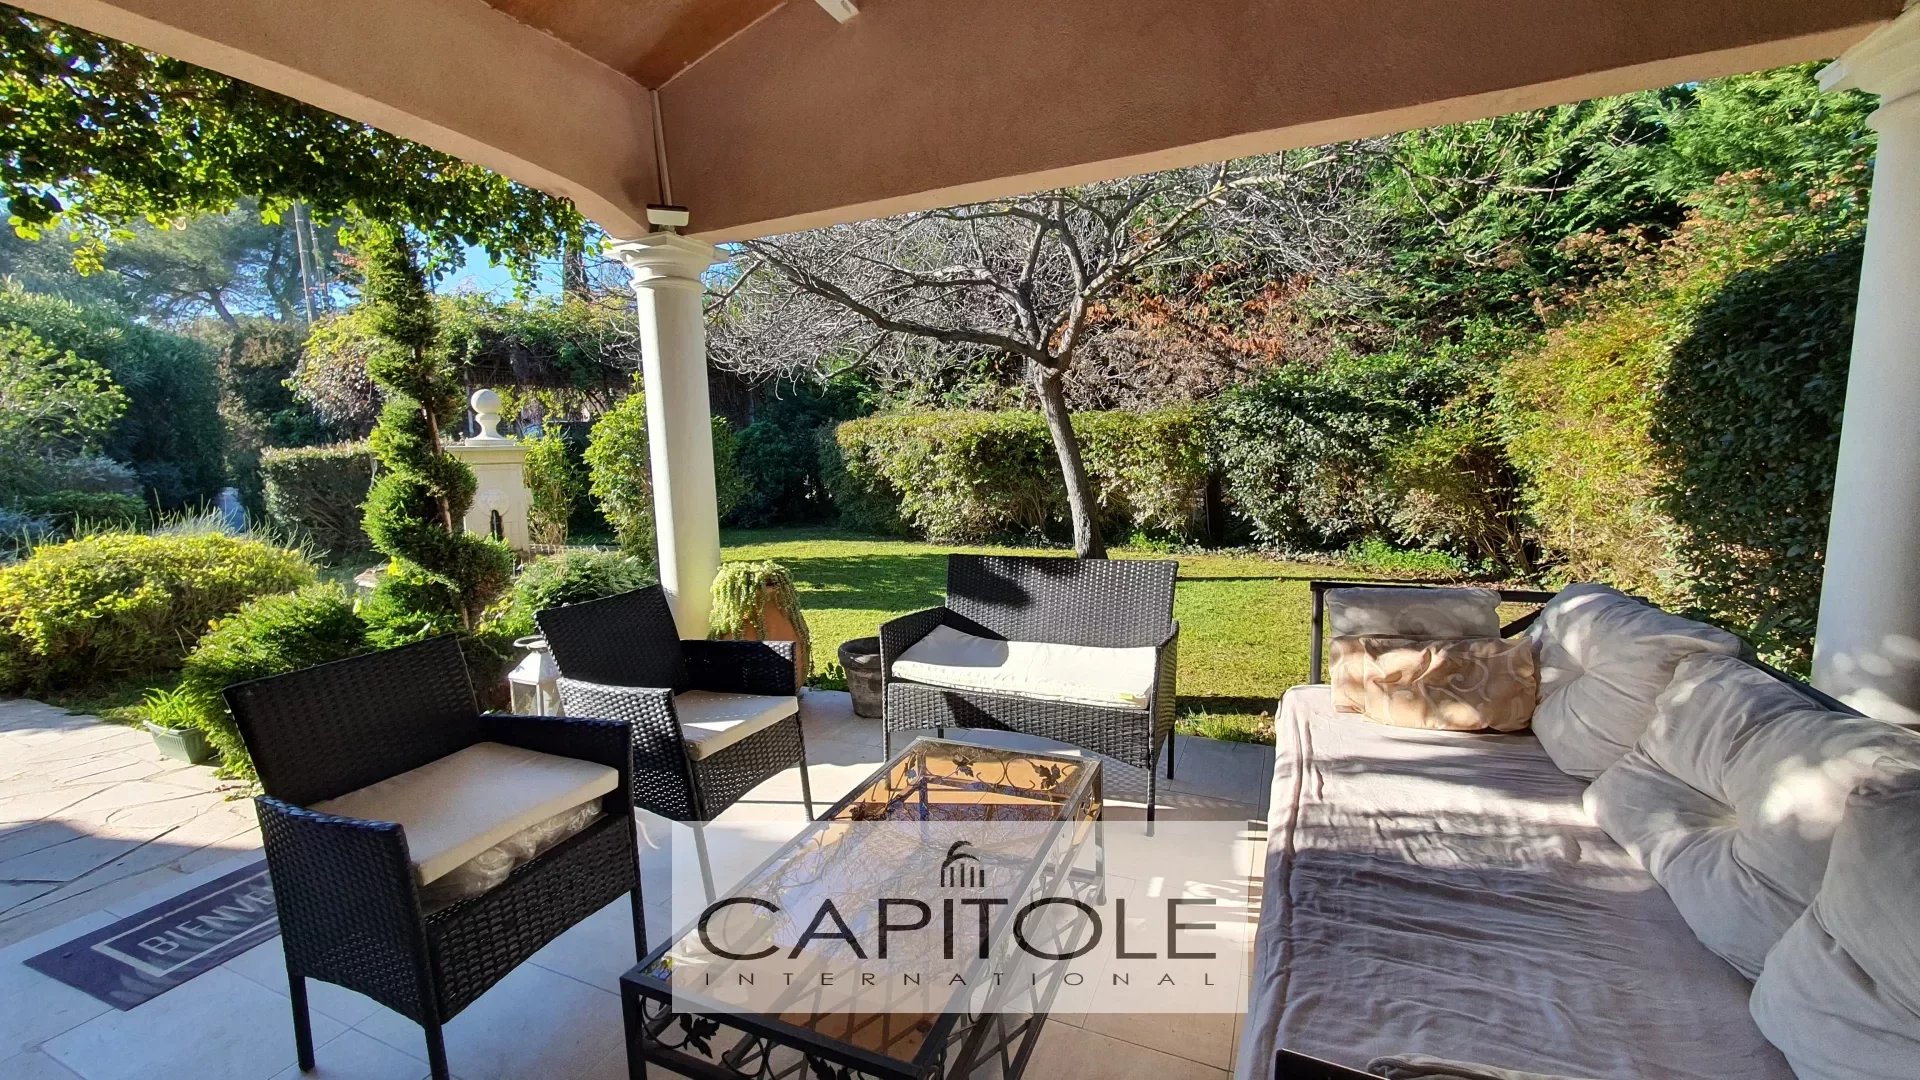 ANTIBES - SOLE AGENT PROPERTY - Superb single-storey property with pool on wooded land of 3200 m²